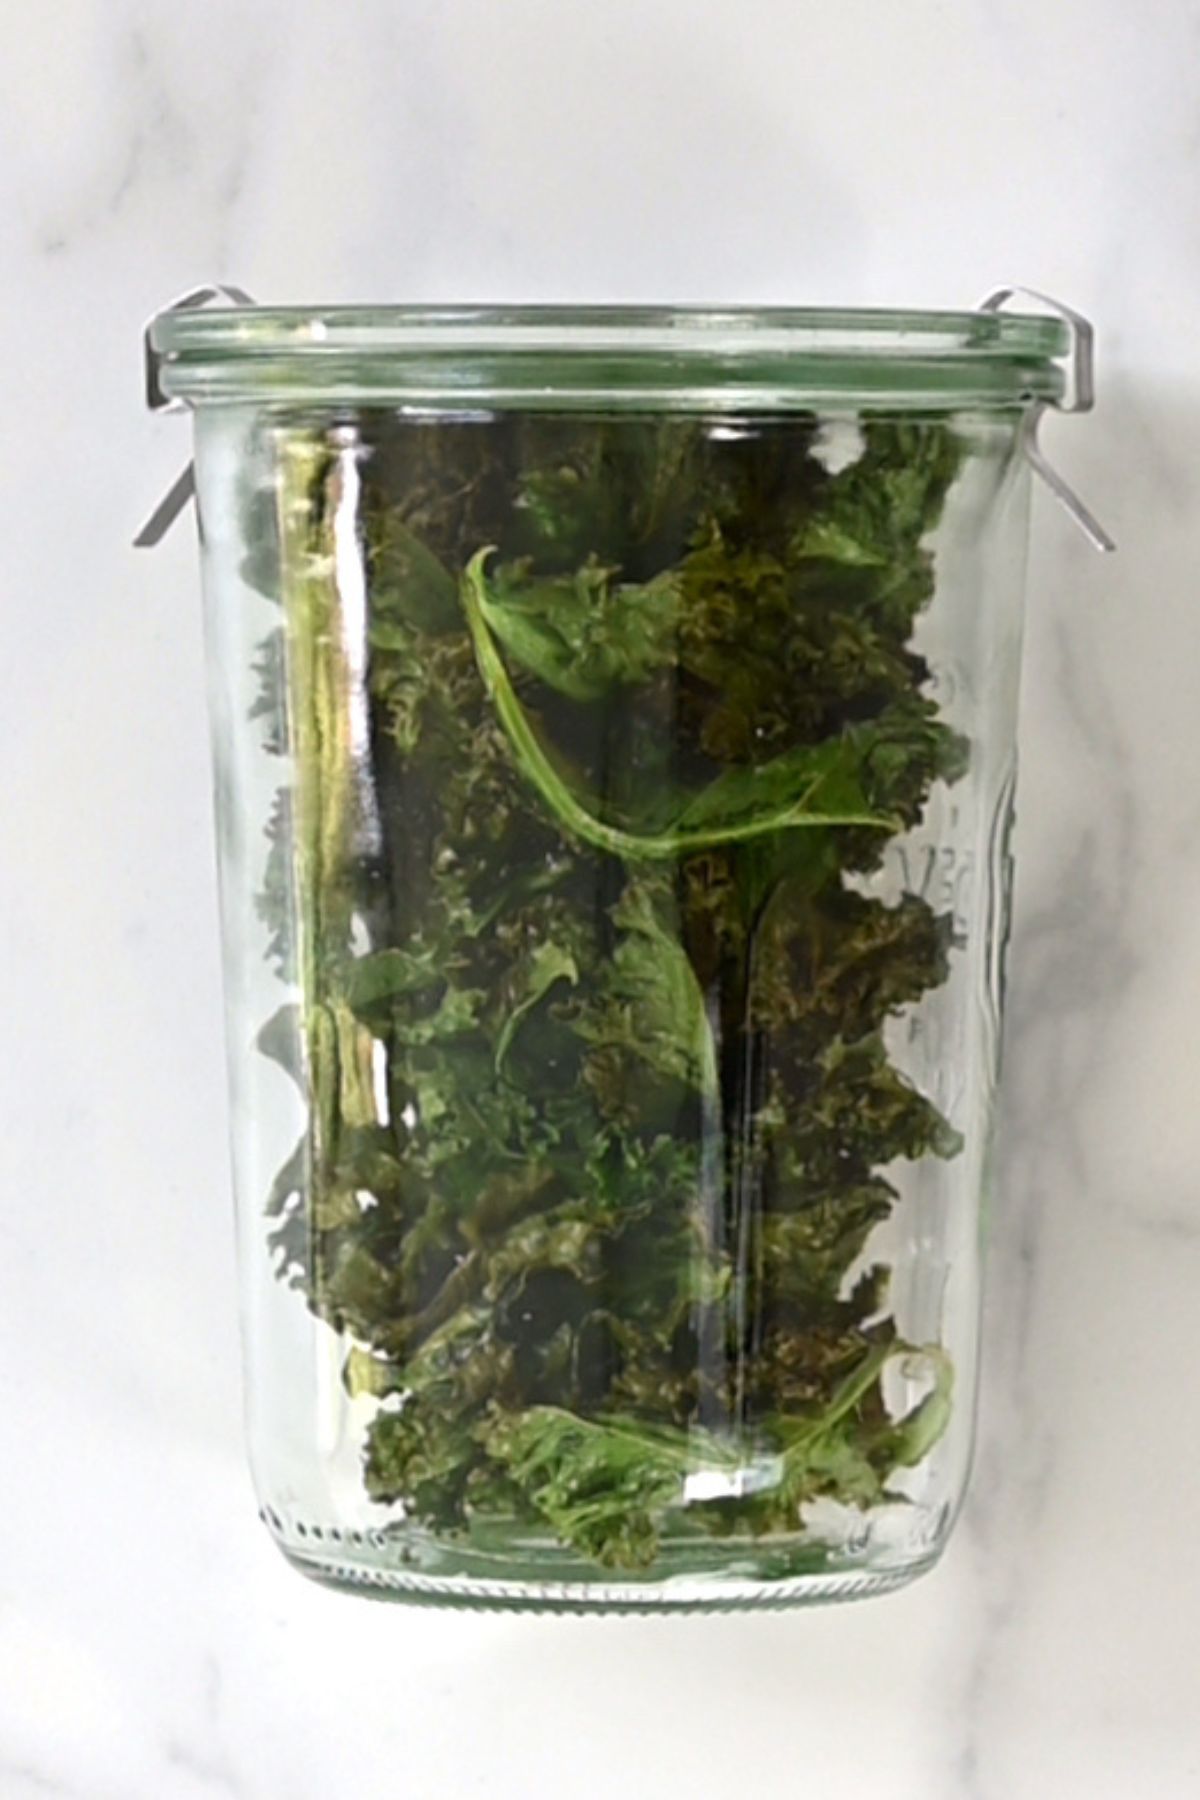 A jar with homemade kale chips